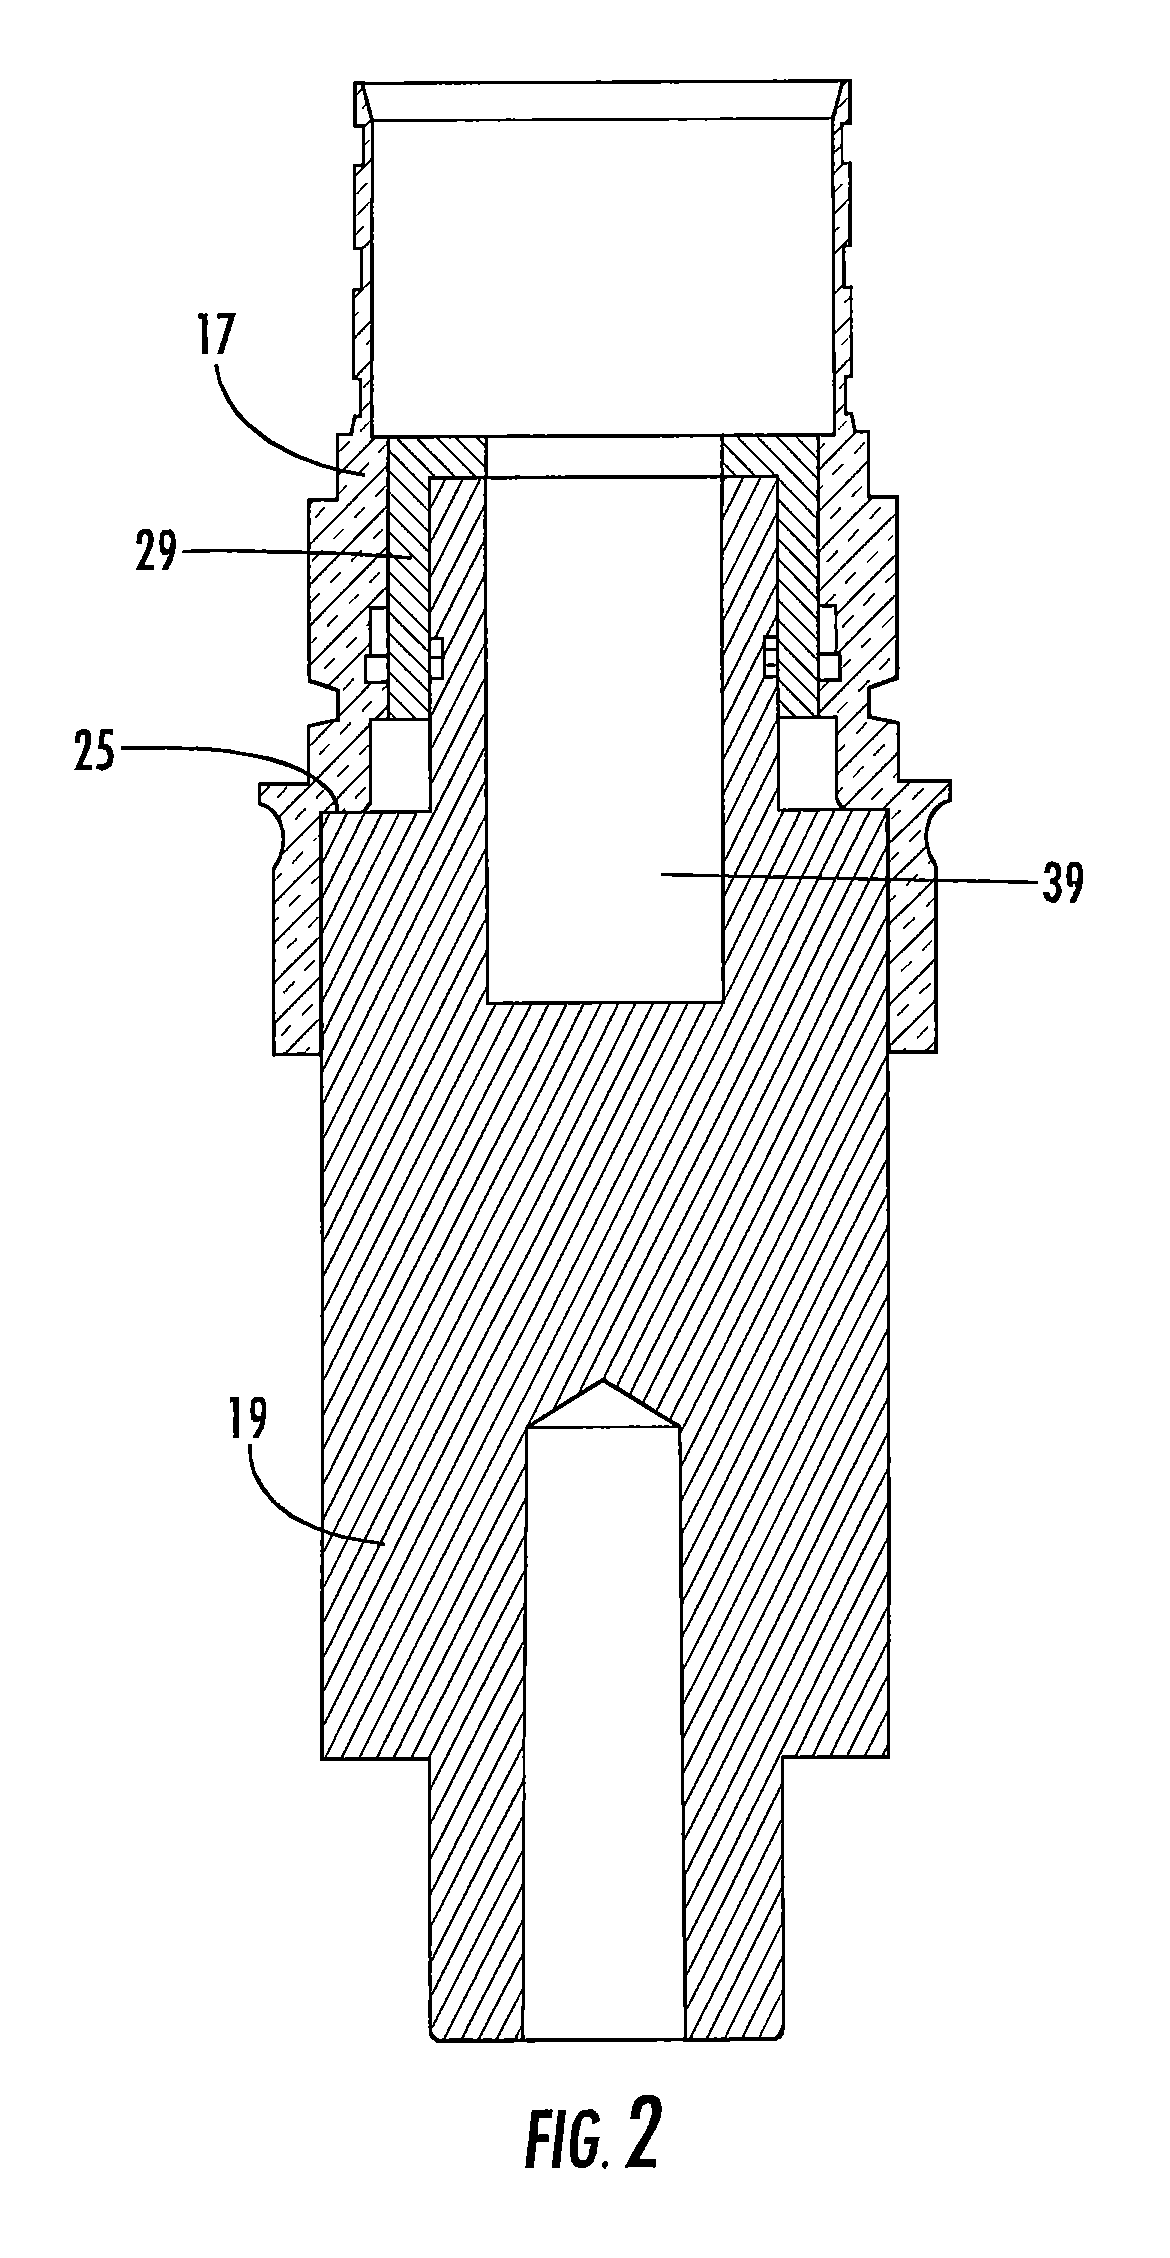 Method and apparatus for forming interface between coaxial cable and connector